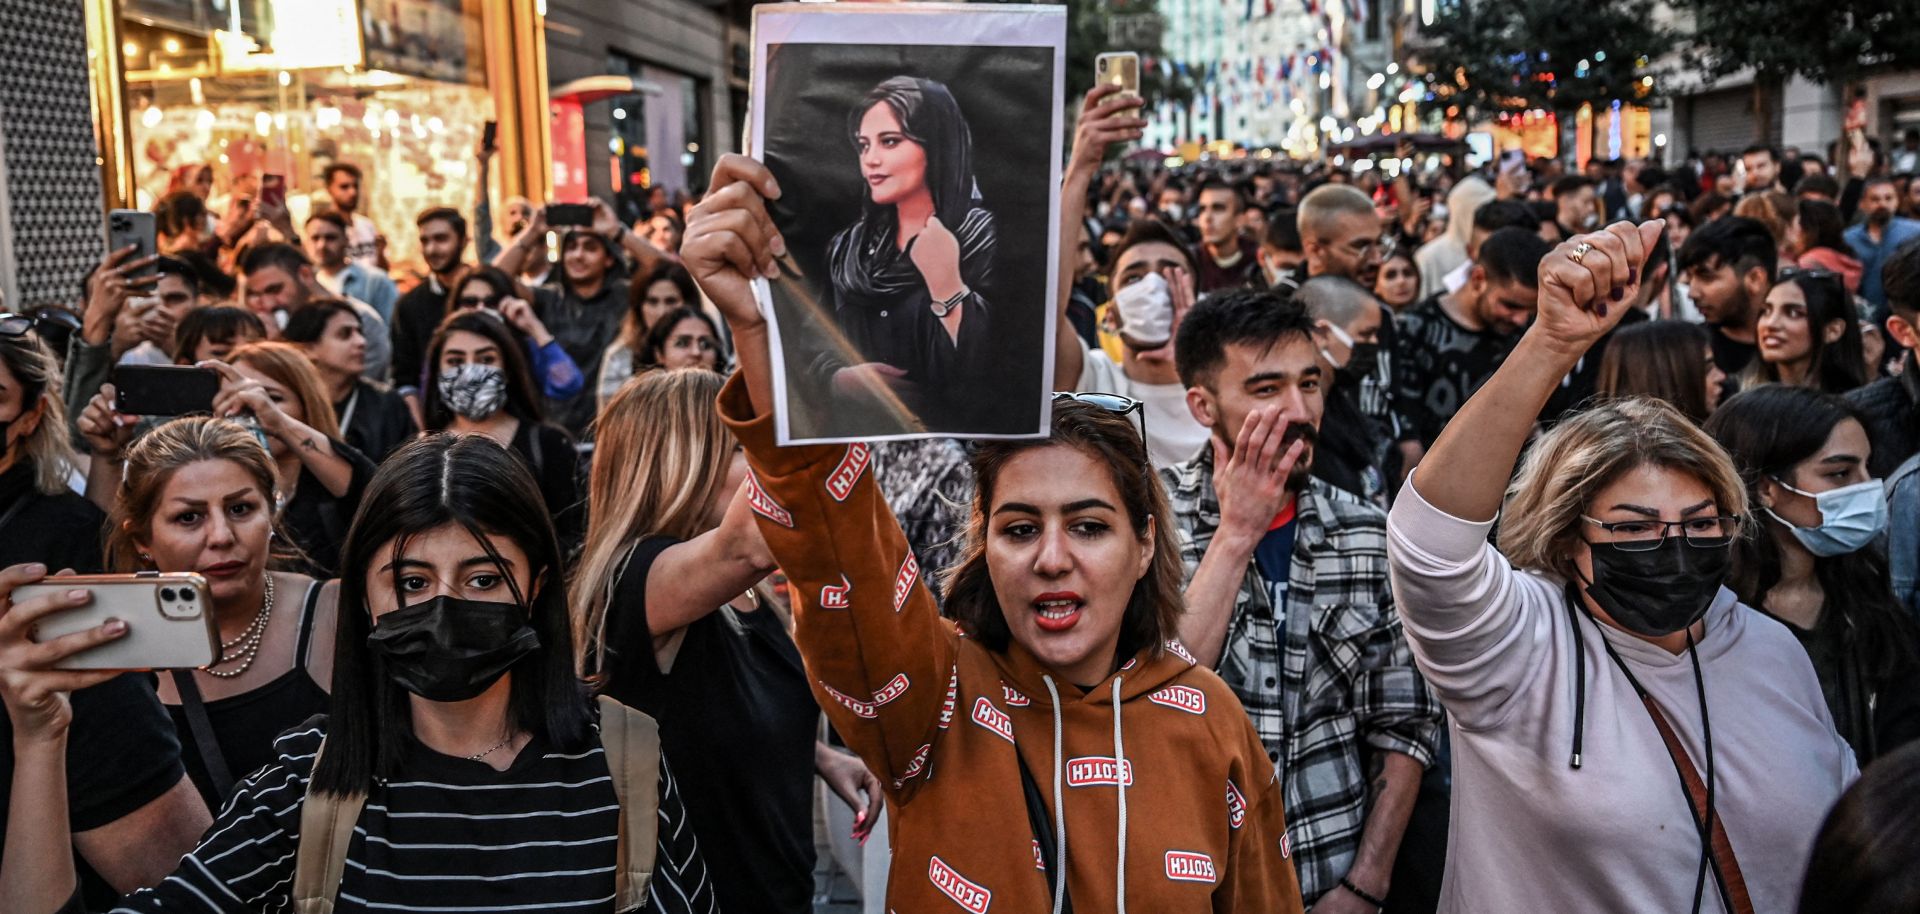 A protester in Turkey holds a portrait of Mahsa Amini during a demonstration in support of Amini, a young Iranian woman who died Sept. 16 after being arrested in the Iranian capital of Tehran by the morality police. 